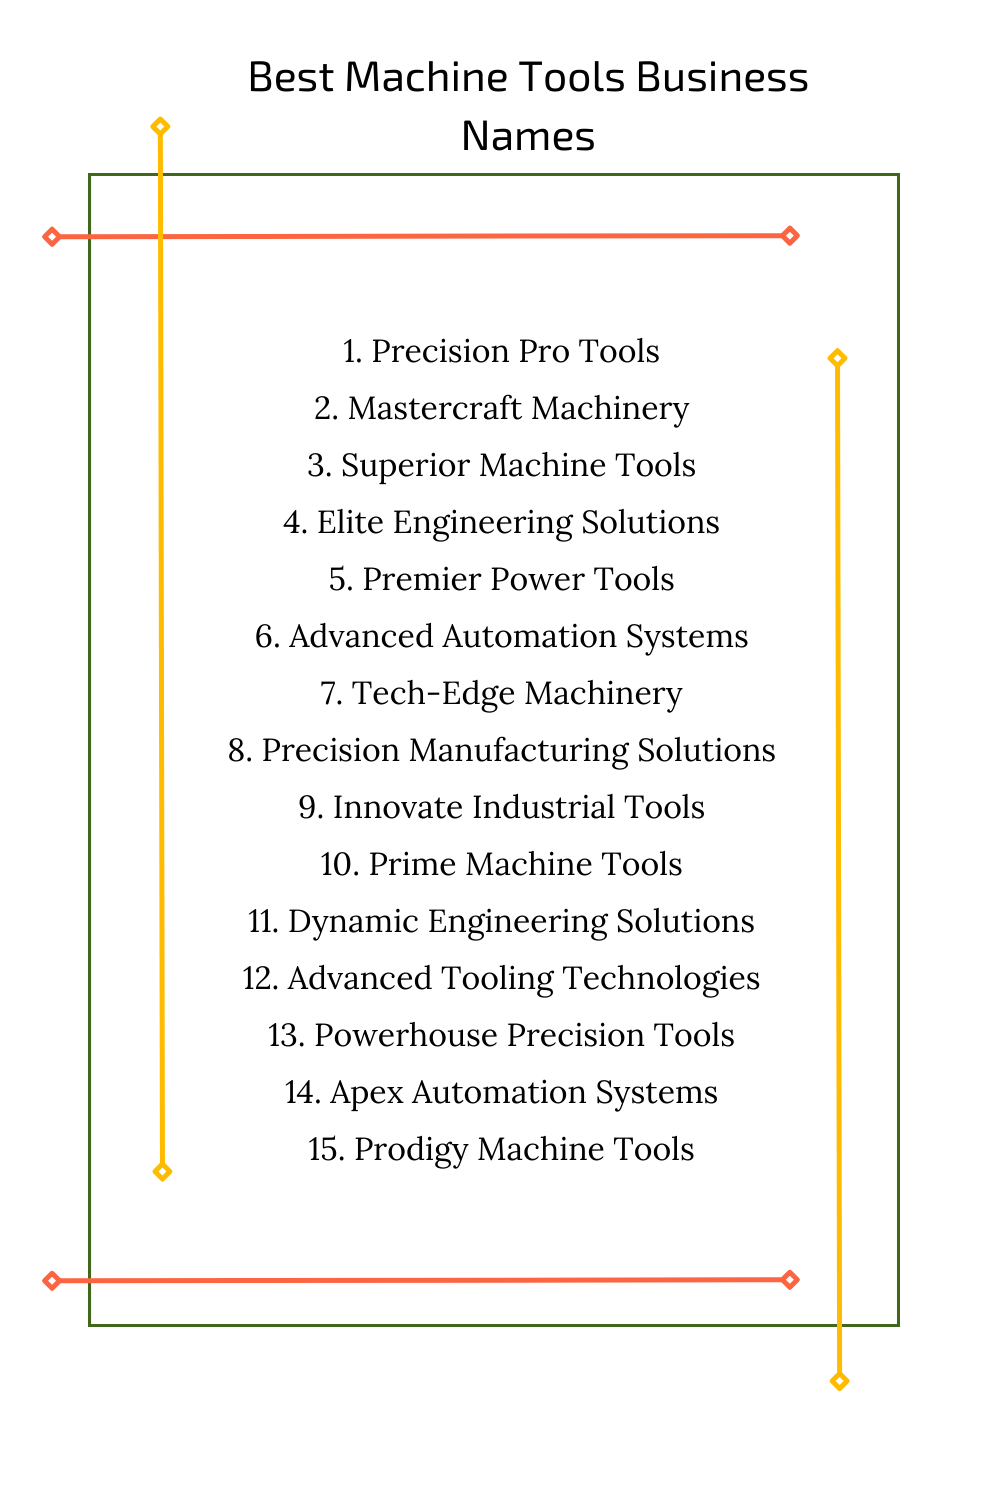 Best Machine Tools Business Names